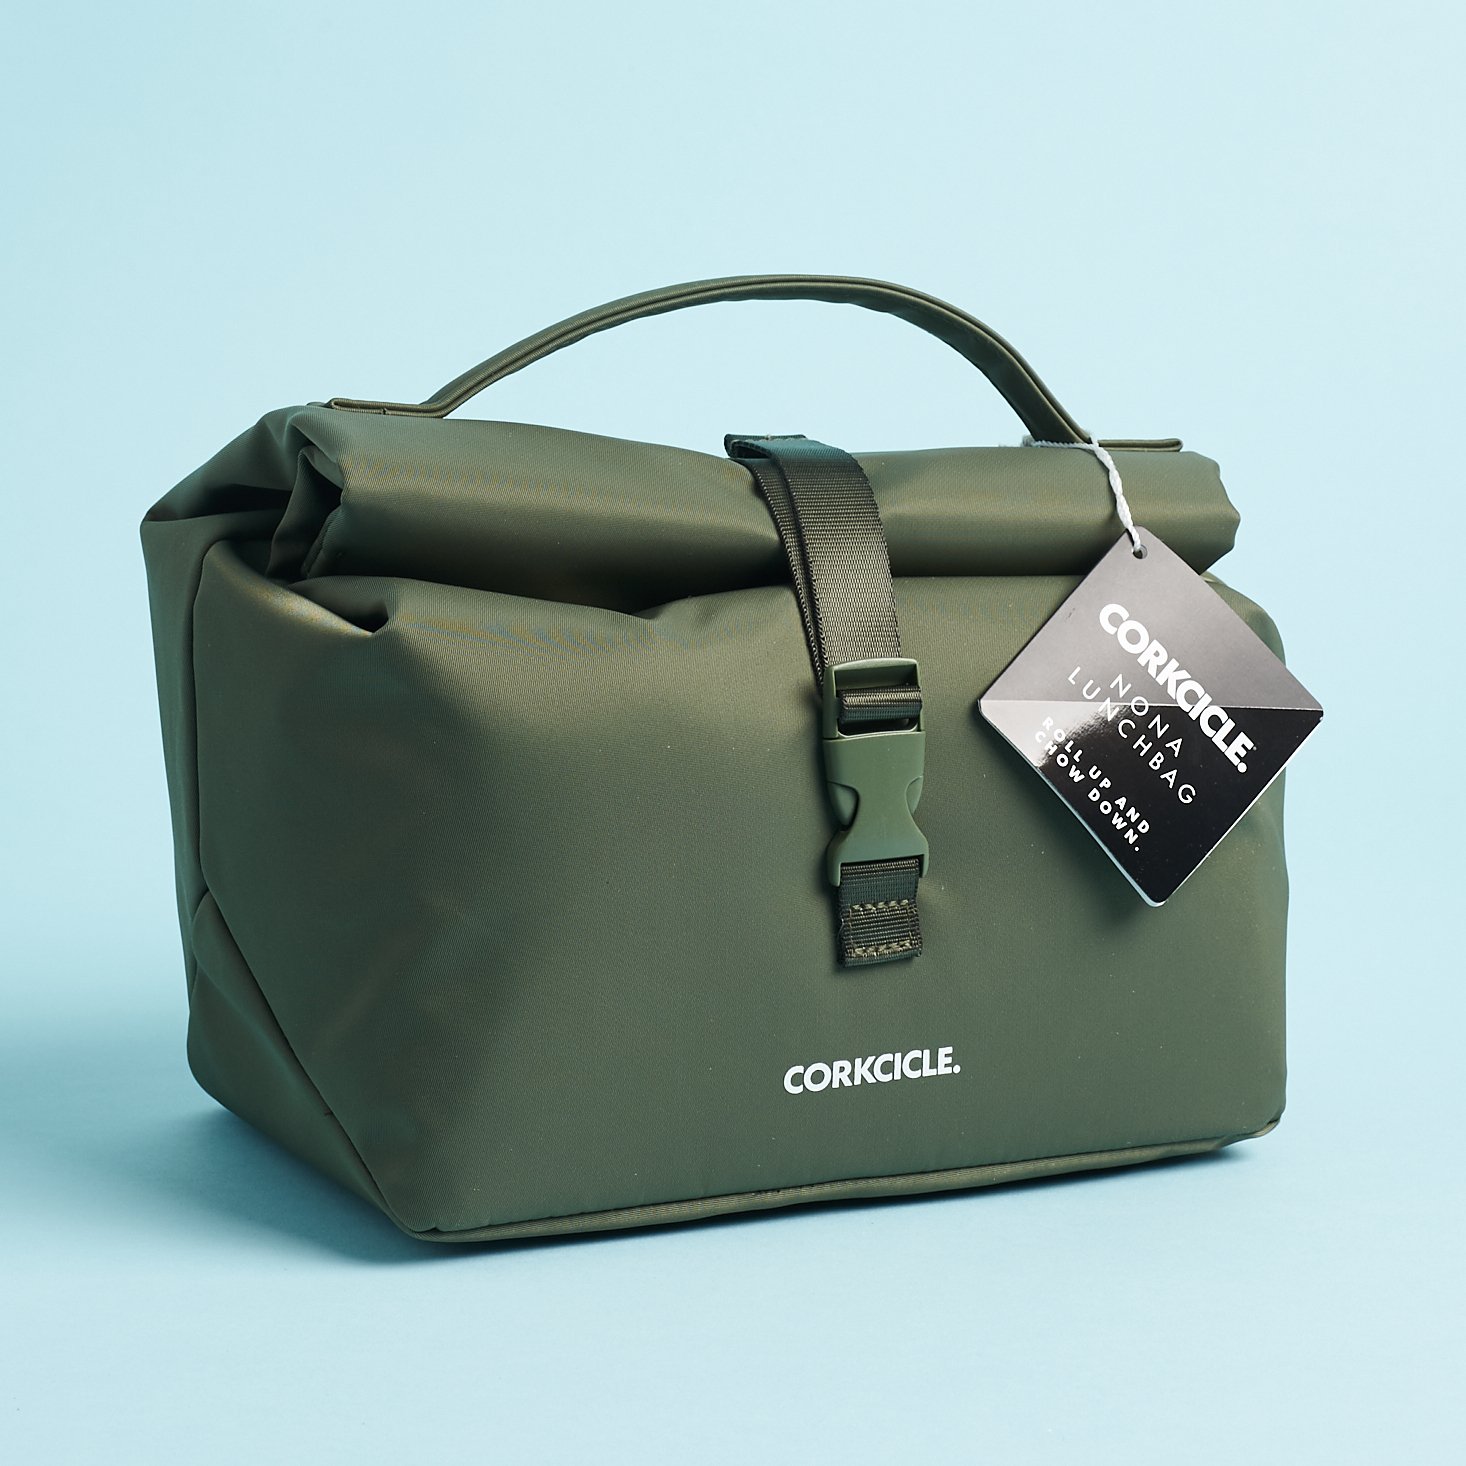 Corkcicle Nona Roll-Top Lunchbox from Breo Box Spring 2021